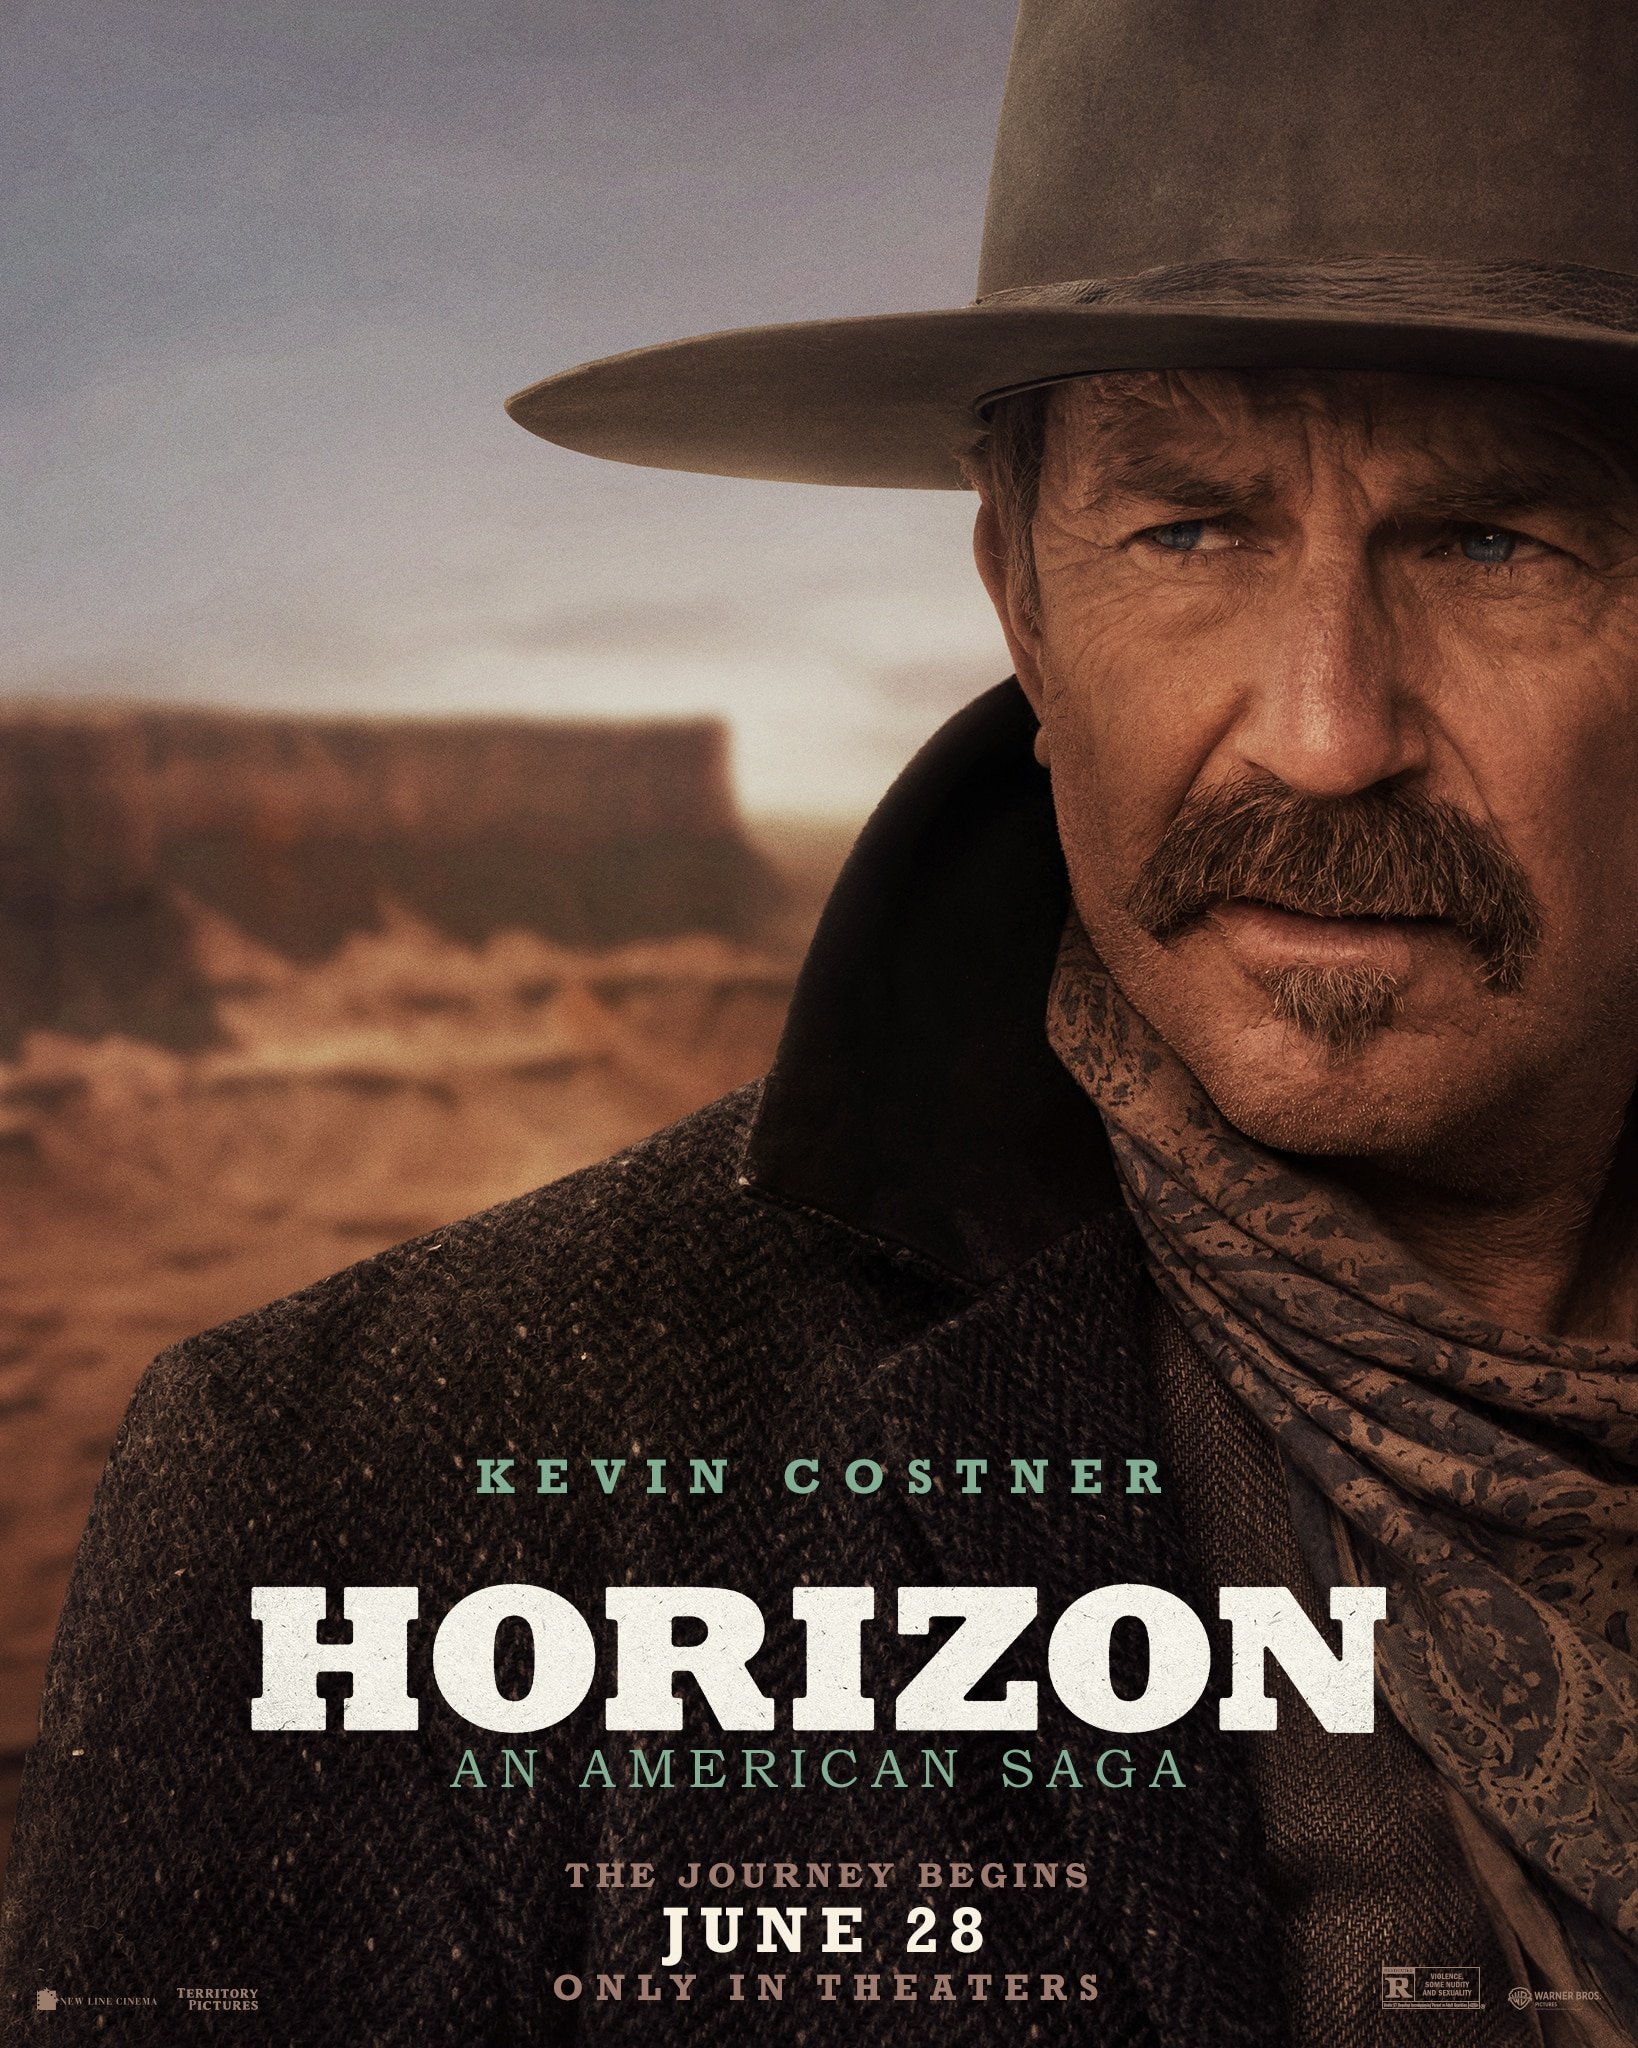 How did Kevin Costner's Horizon movie perform at the box office?